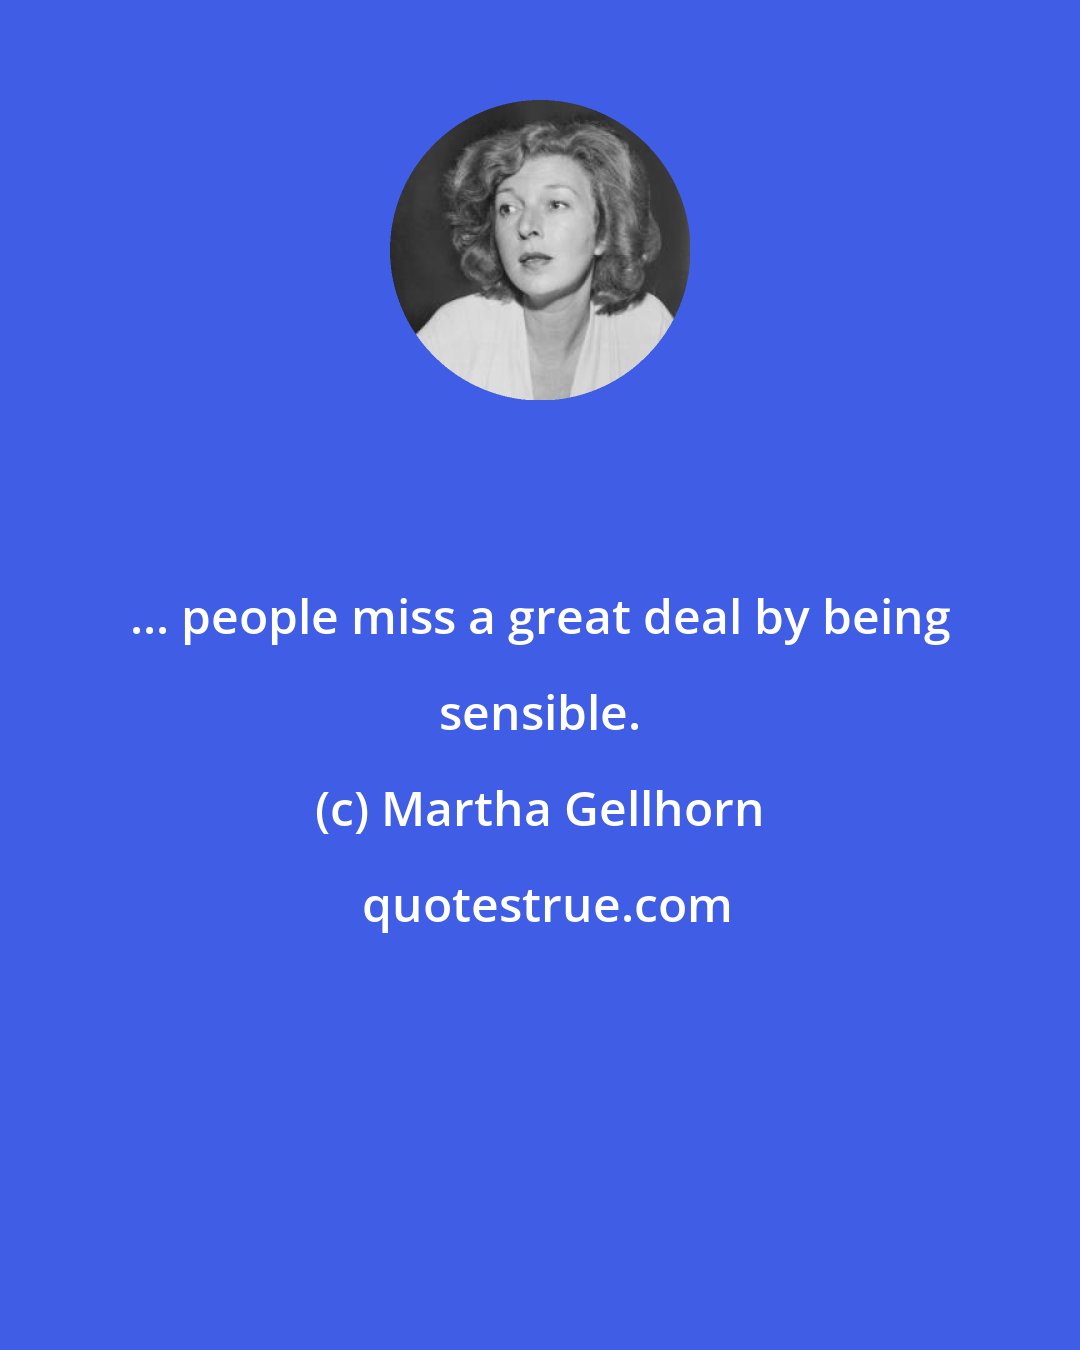 Martha Gellhorn: ... people miss a great deal by being sensible.